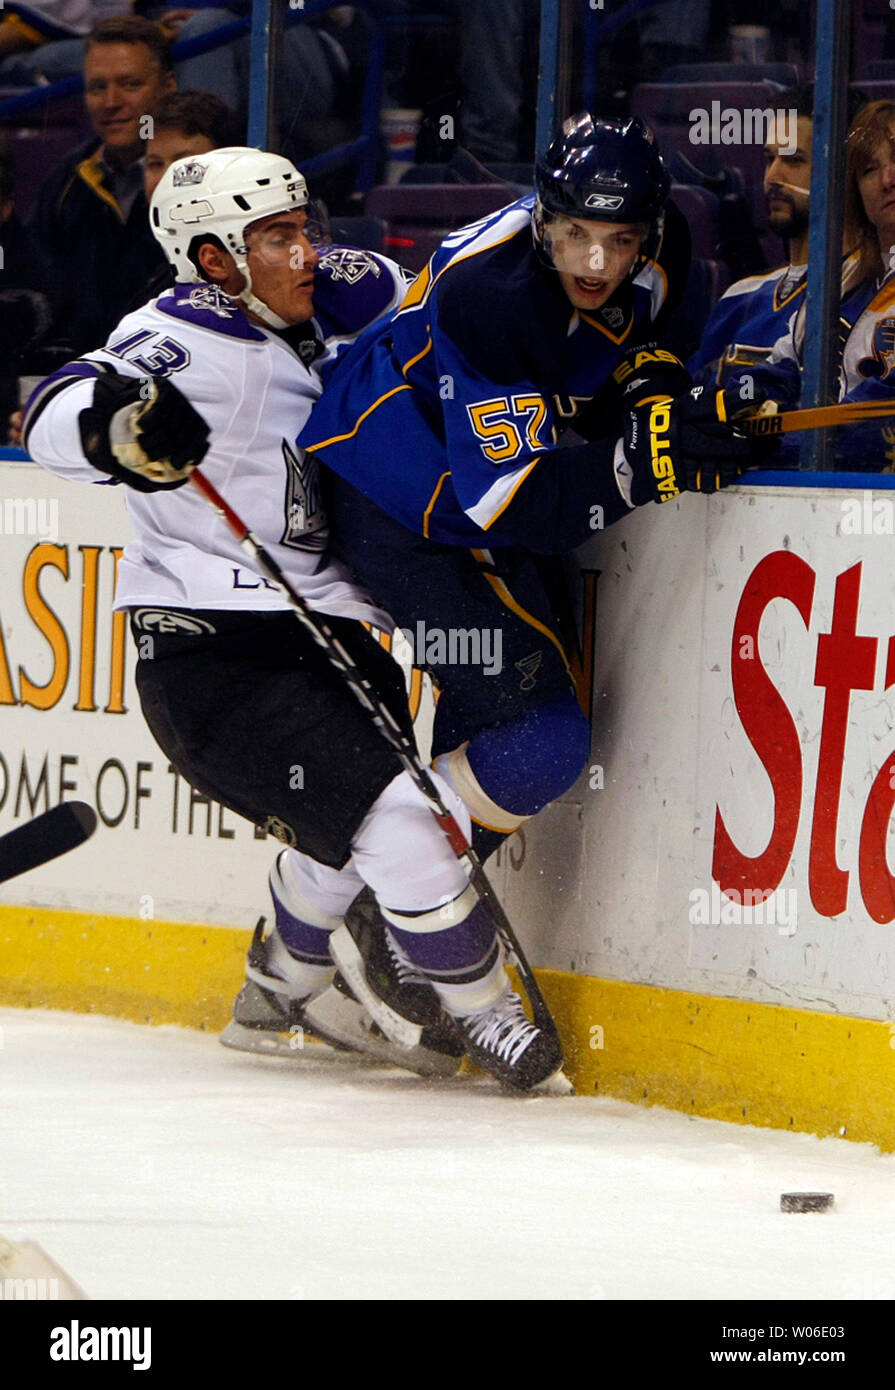 Los Angeles Kings Michael Cammalleri (L) forces St. Louis Blues David Perron into the boards during the first period at the Scottrade Center in St. Louis on March 4, 2008.  (UPI Photo/Bill Greenblatt) Stock Photo